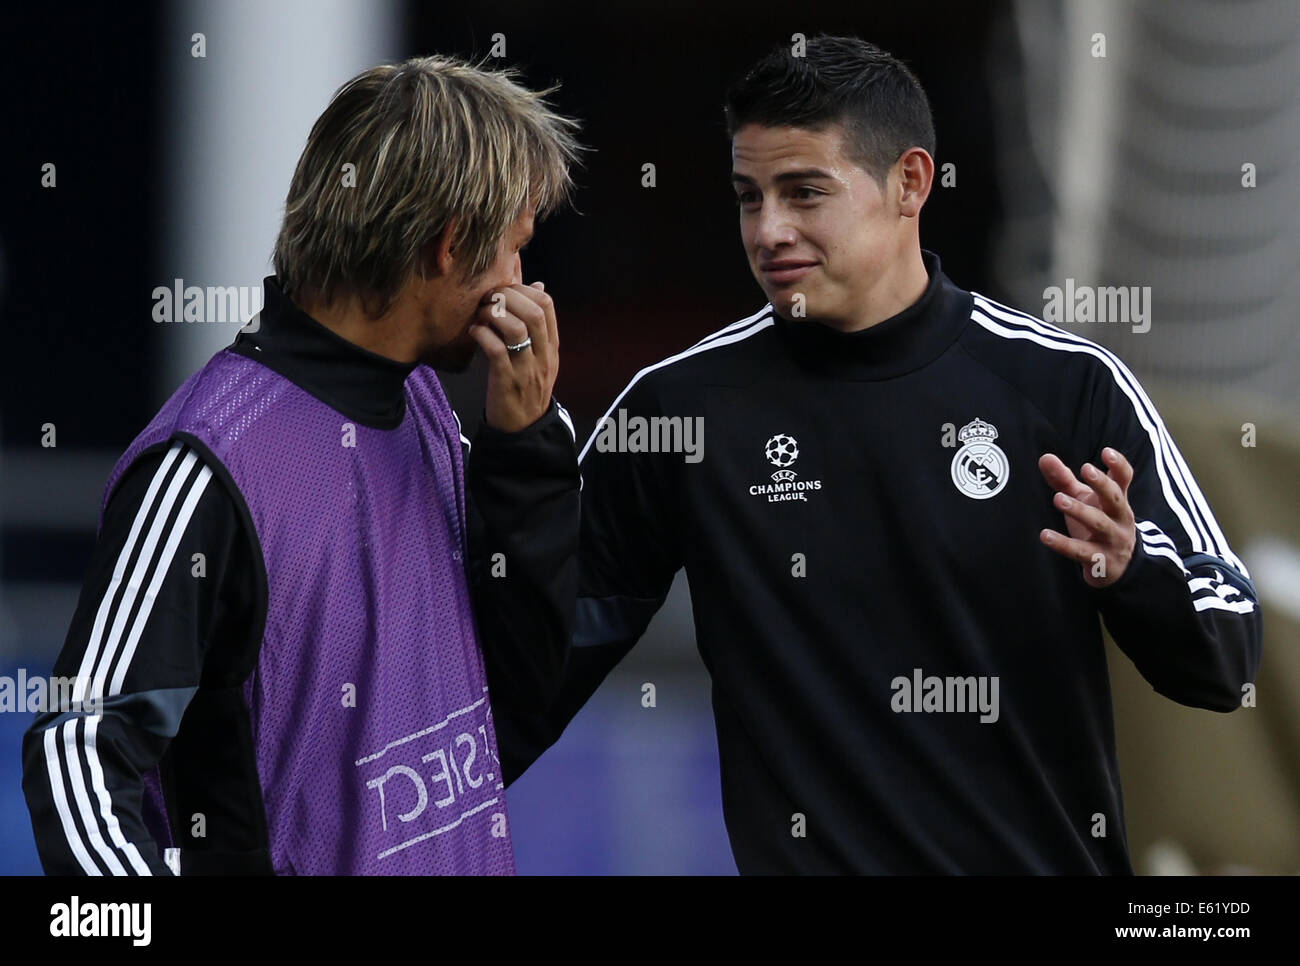 Cardiff. 11th Aug, 2014. James Rodriguez(R) of Real Madrid talks with his teammate Fabio Coentrao during a training session for the UEFA Super Cup match between Real Madrid and Sevilla at Cardiff City Stadium in Cardiff, Britain on Aug. 11, 2014. © Wang Lili/Xinhua/Alamy Live News Stock Photo